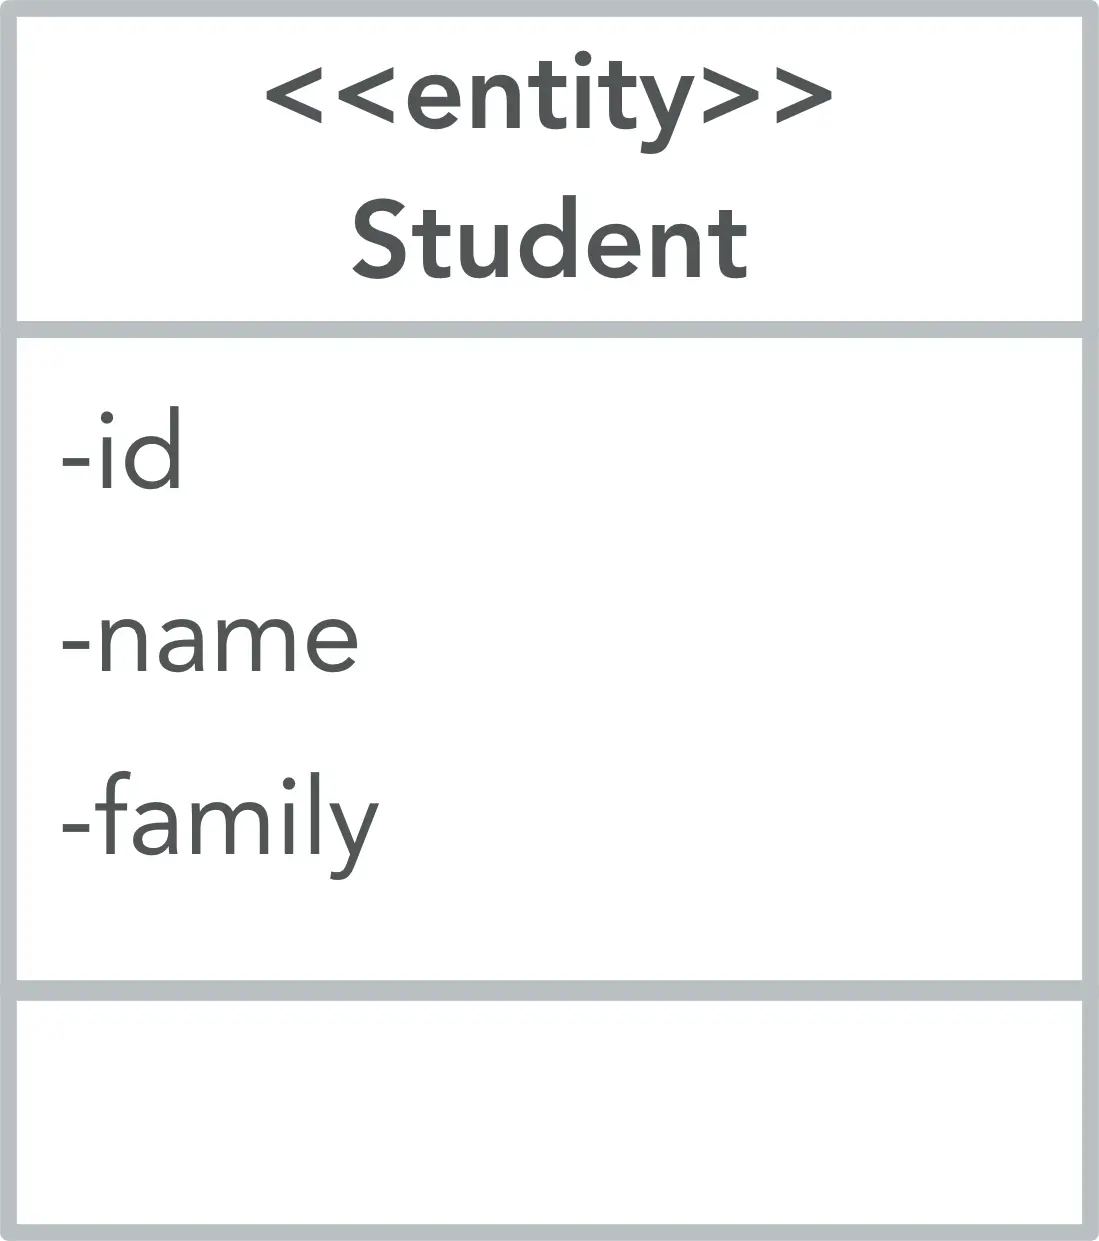 Domain: the Student Entity